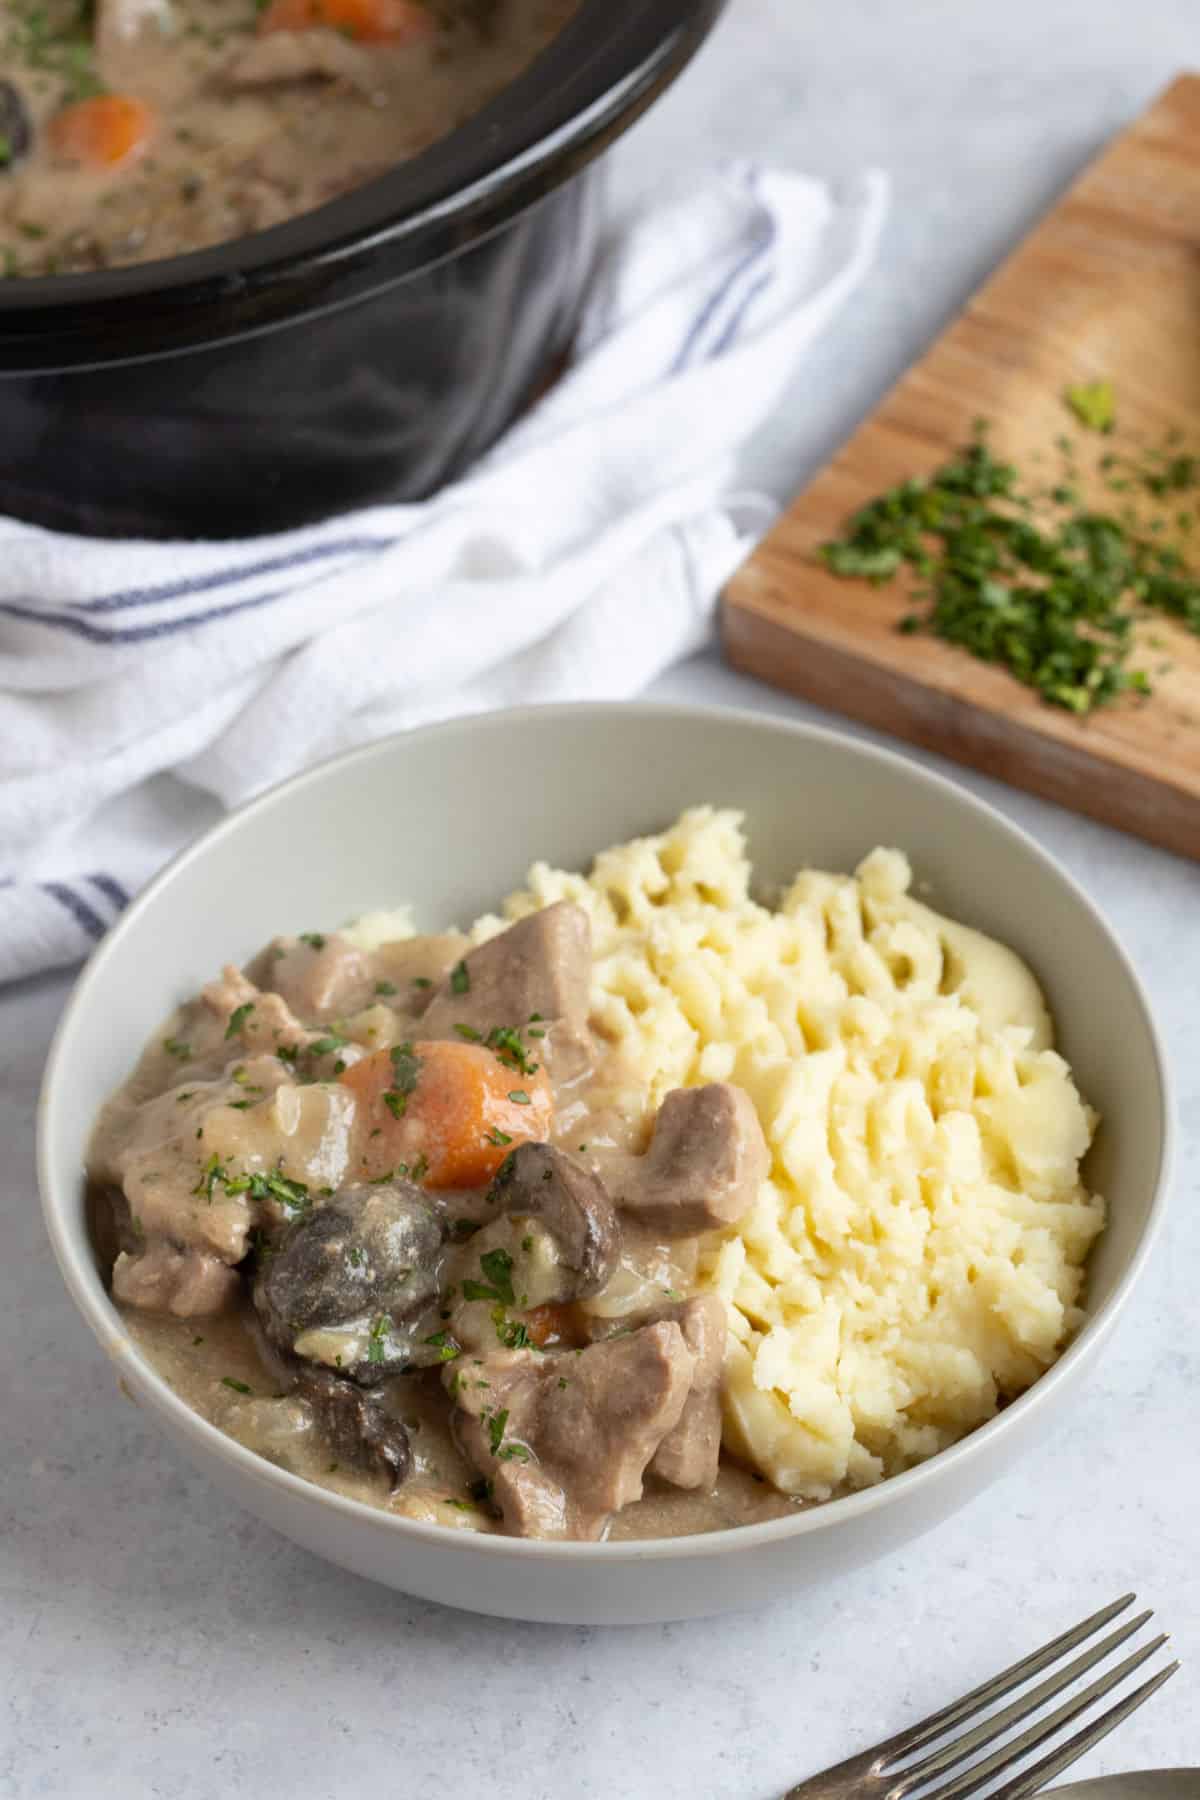 Pork and apple casserole in a bowl with mashed potato.